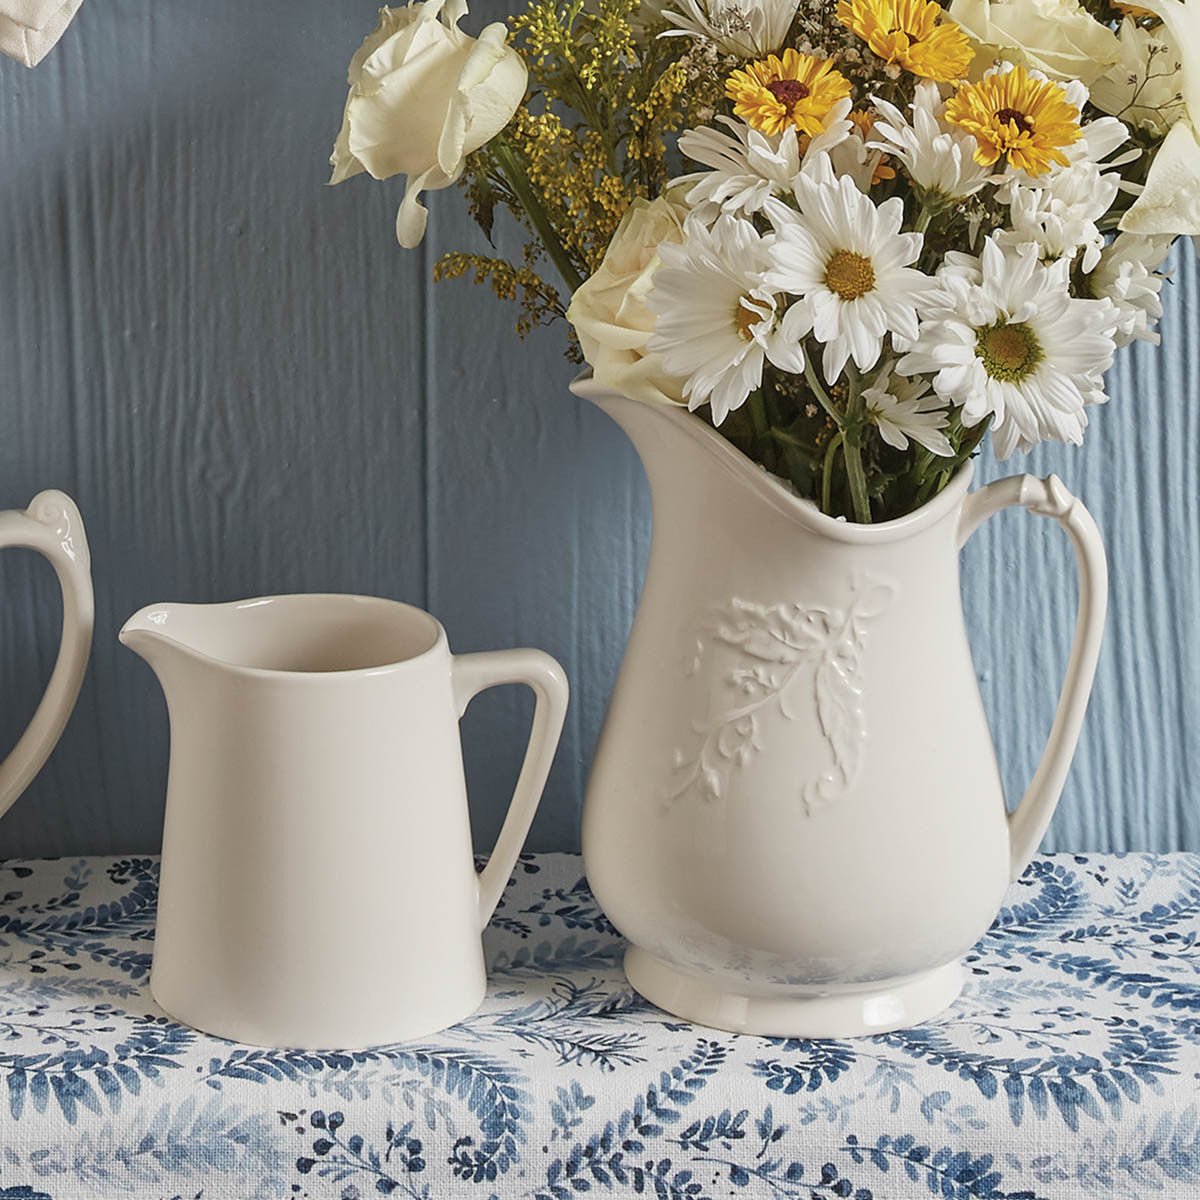 Why Use Stoneware and What are the Benefits? - Mamma Mia's Closet